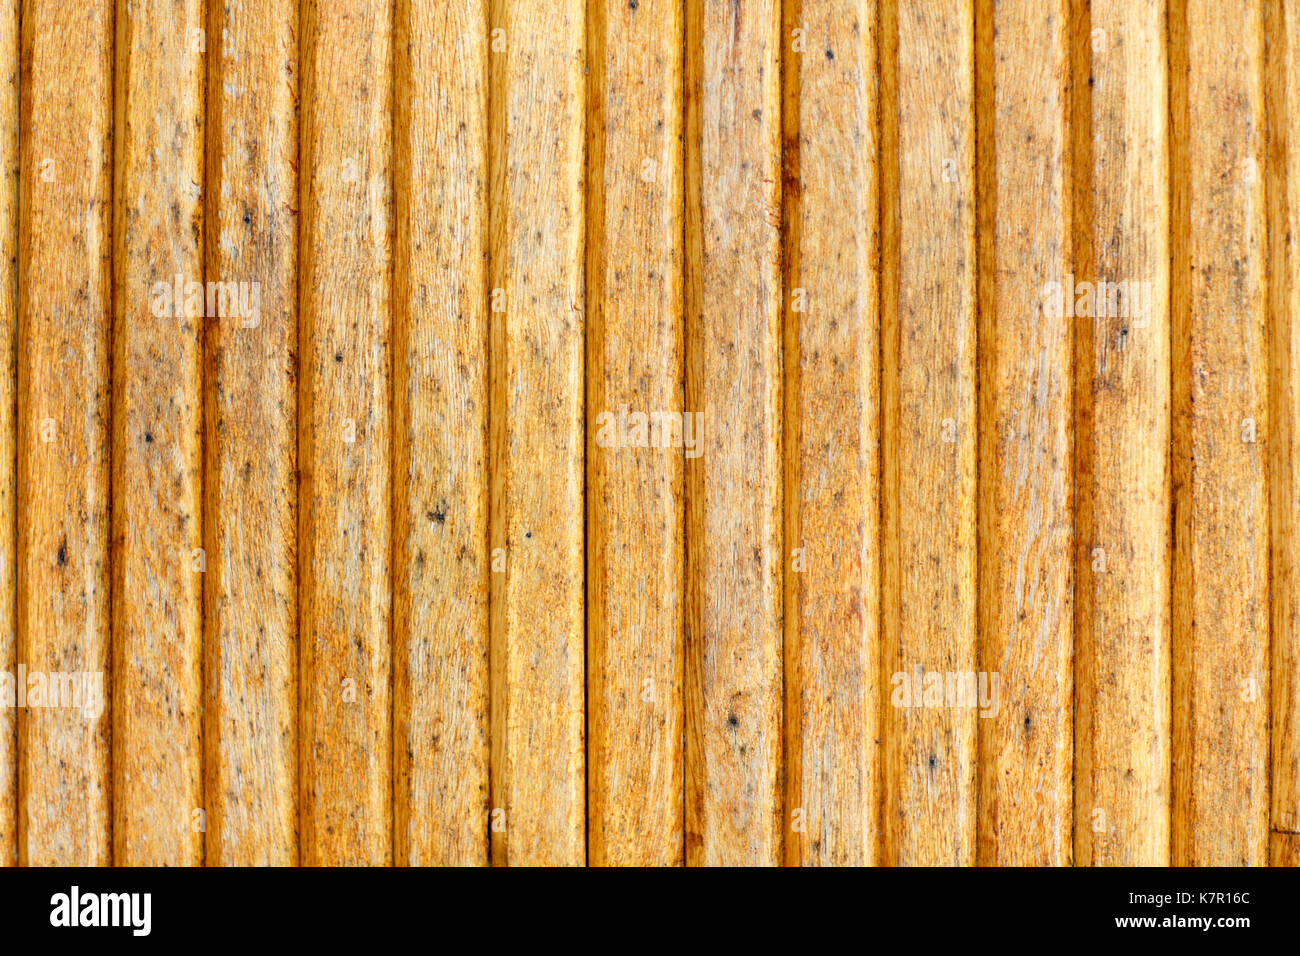 Rustic weathered barn wood background with knots. High resolution photo. Stock Photo